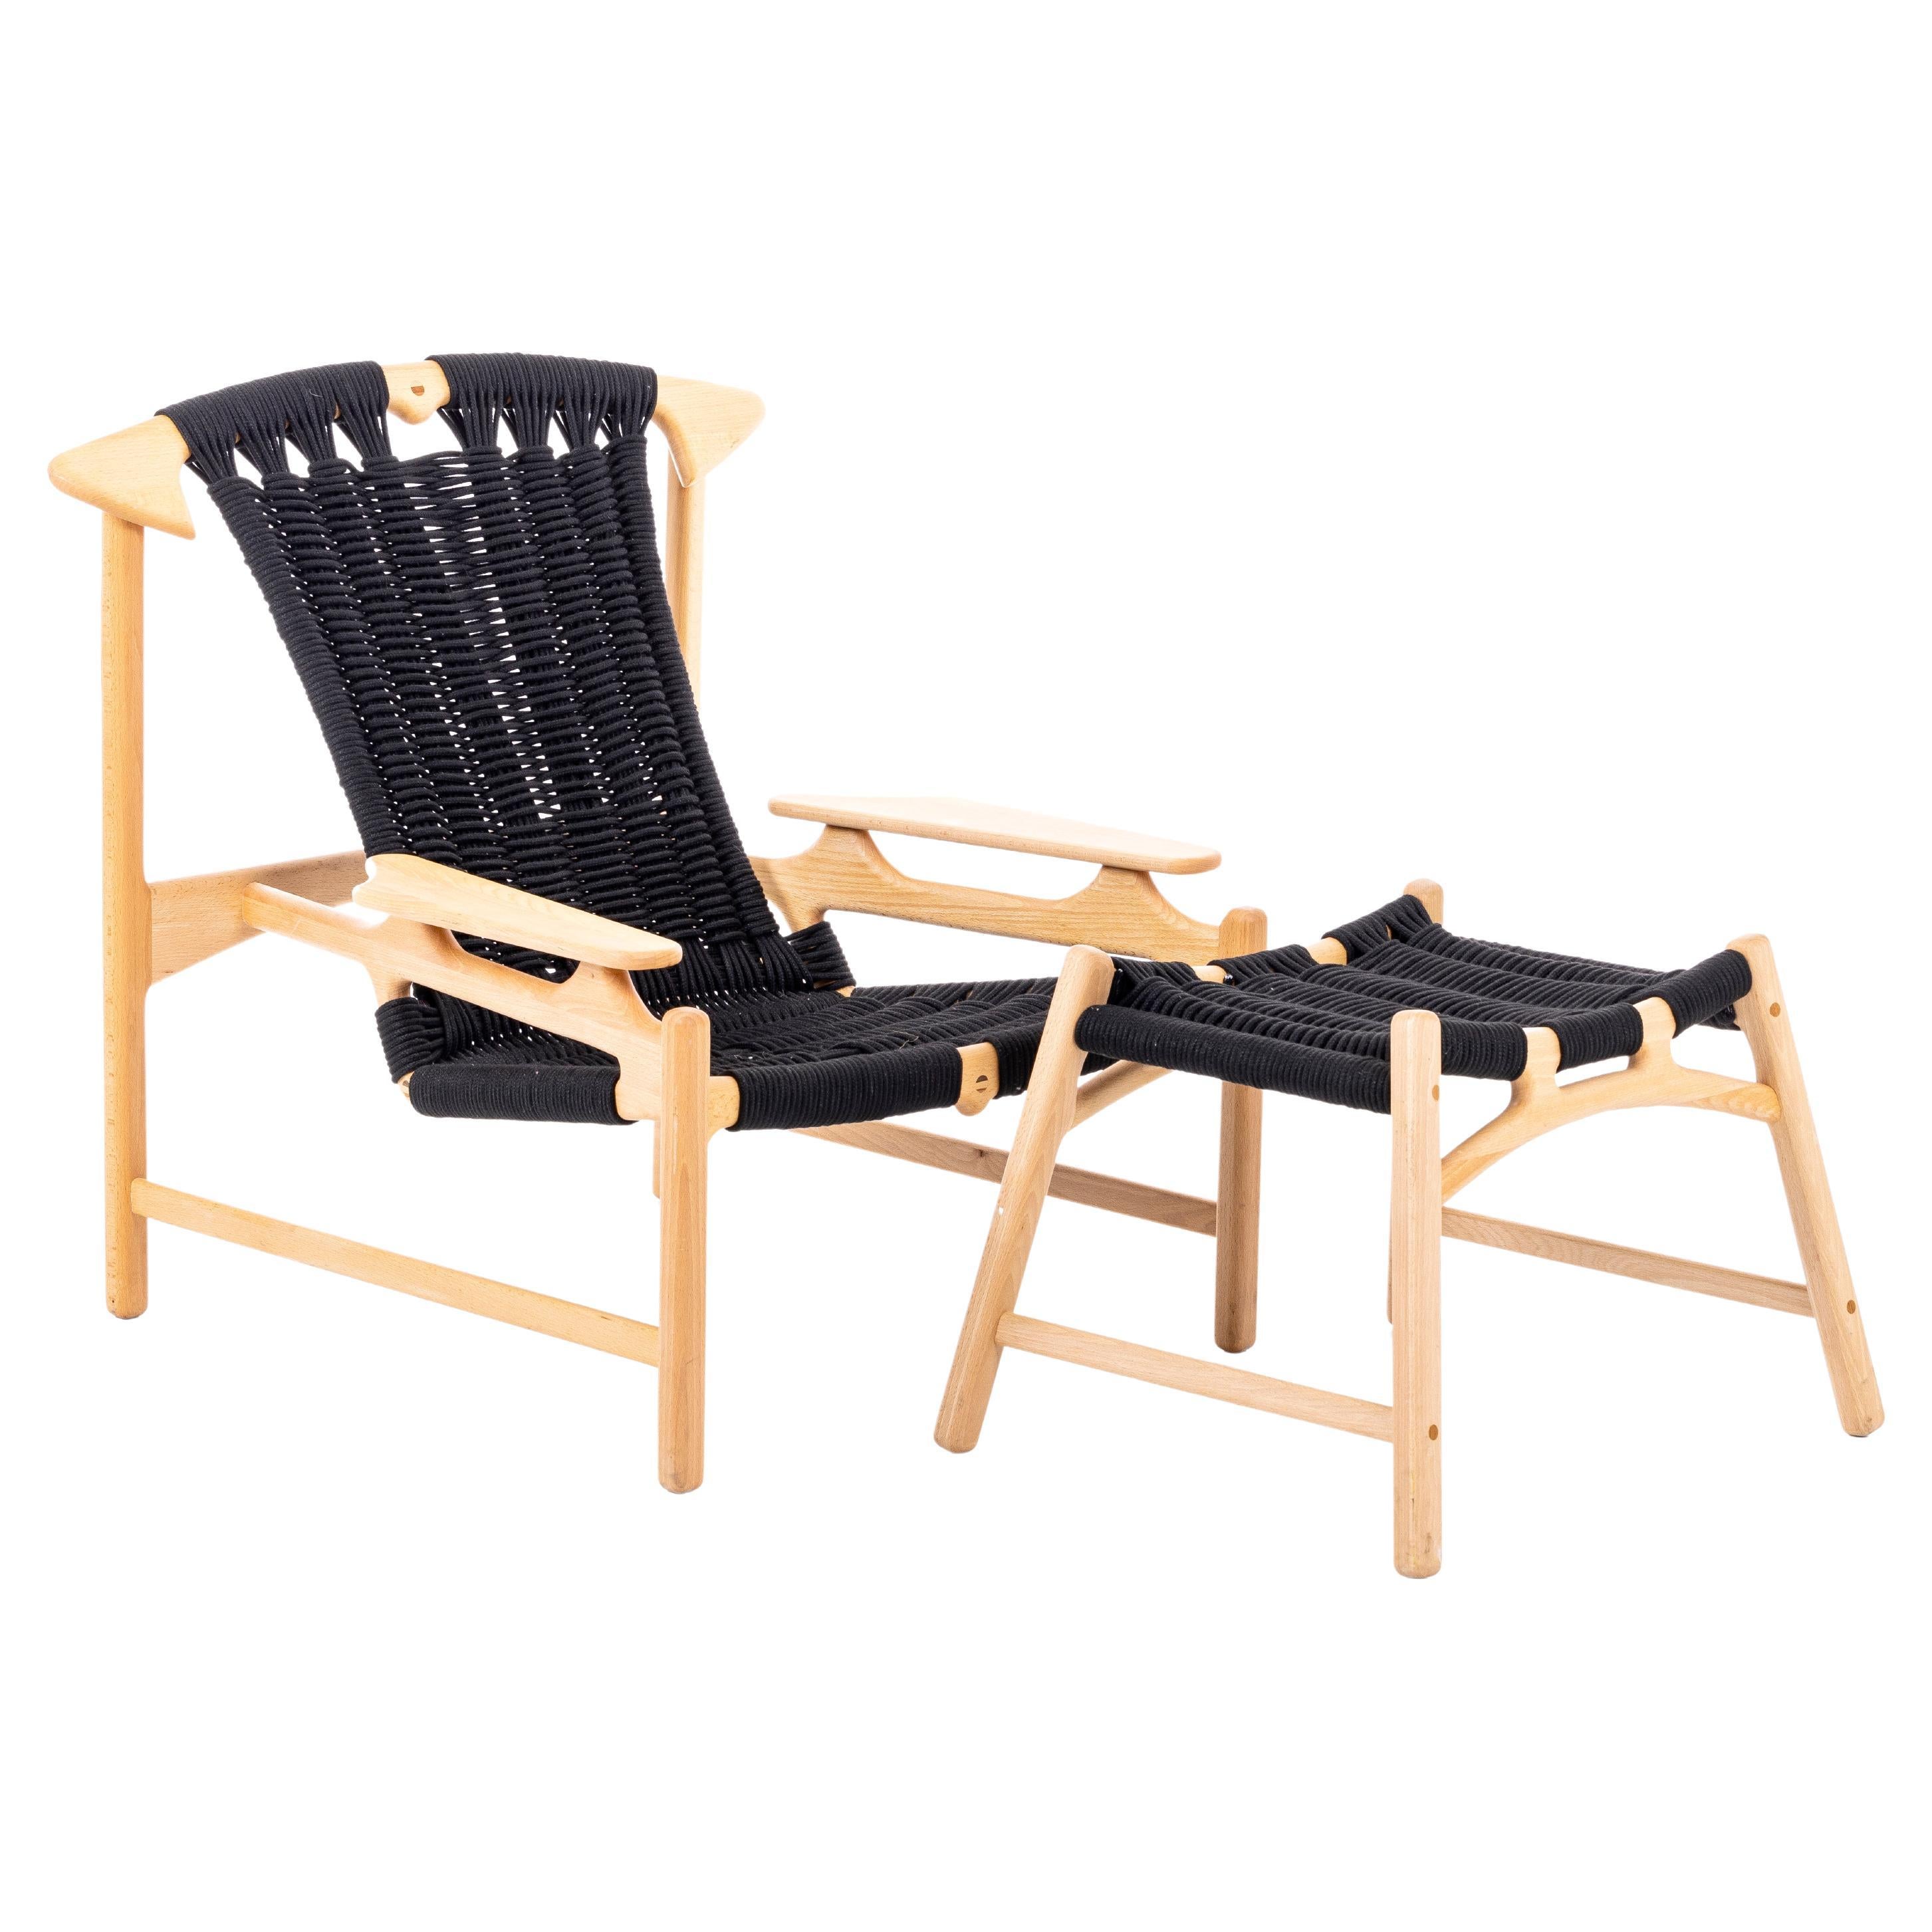 Sculptural Martin Godks Mg27 Lounge 'Hunting Chair and Ottoman' Denmark C.1990 For Sale